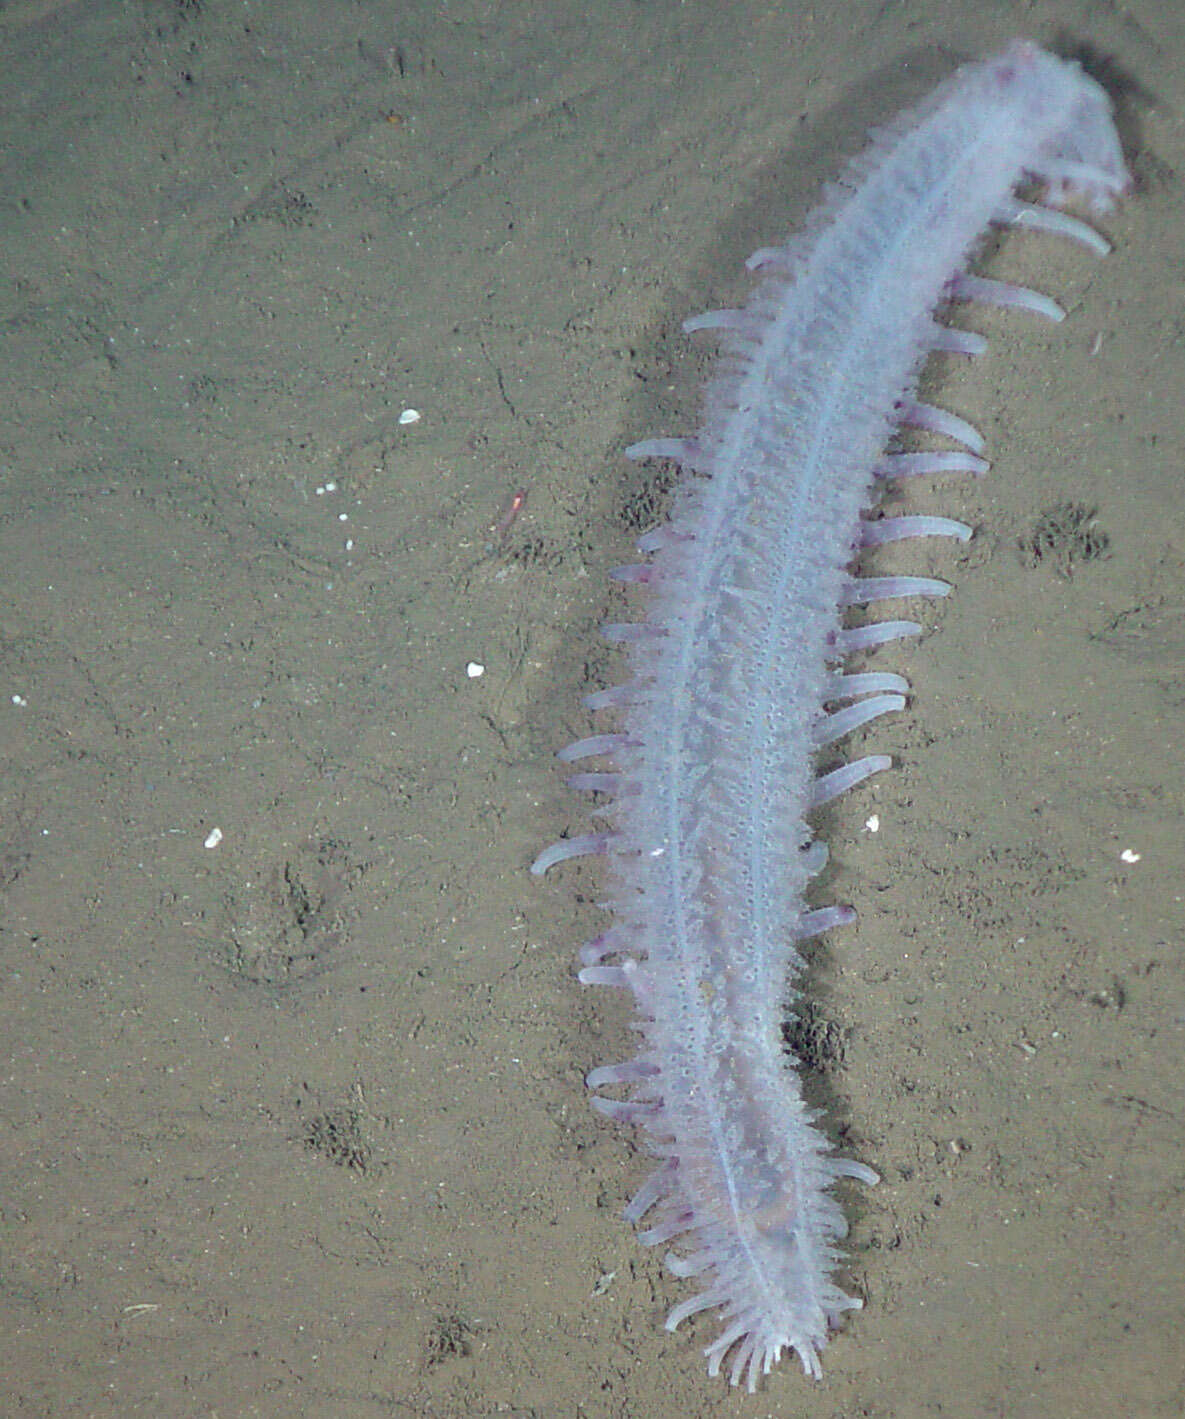 Image of Moseley's sea cucumber